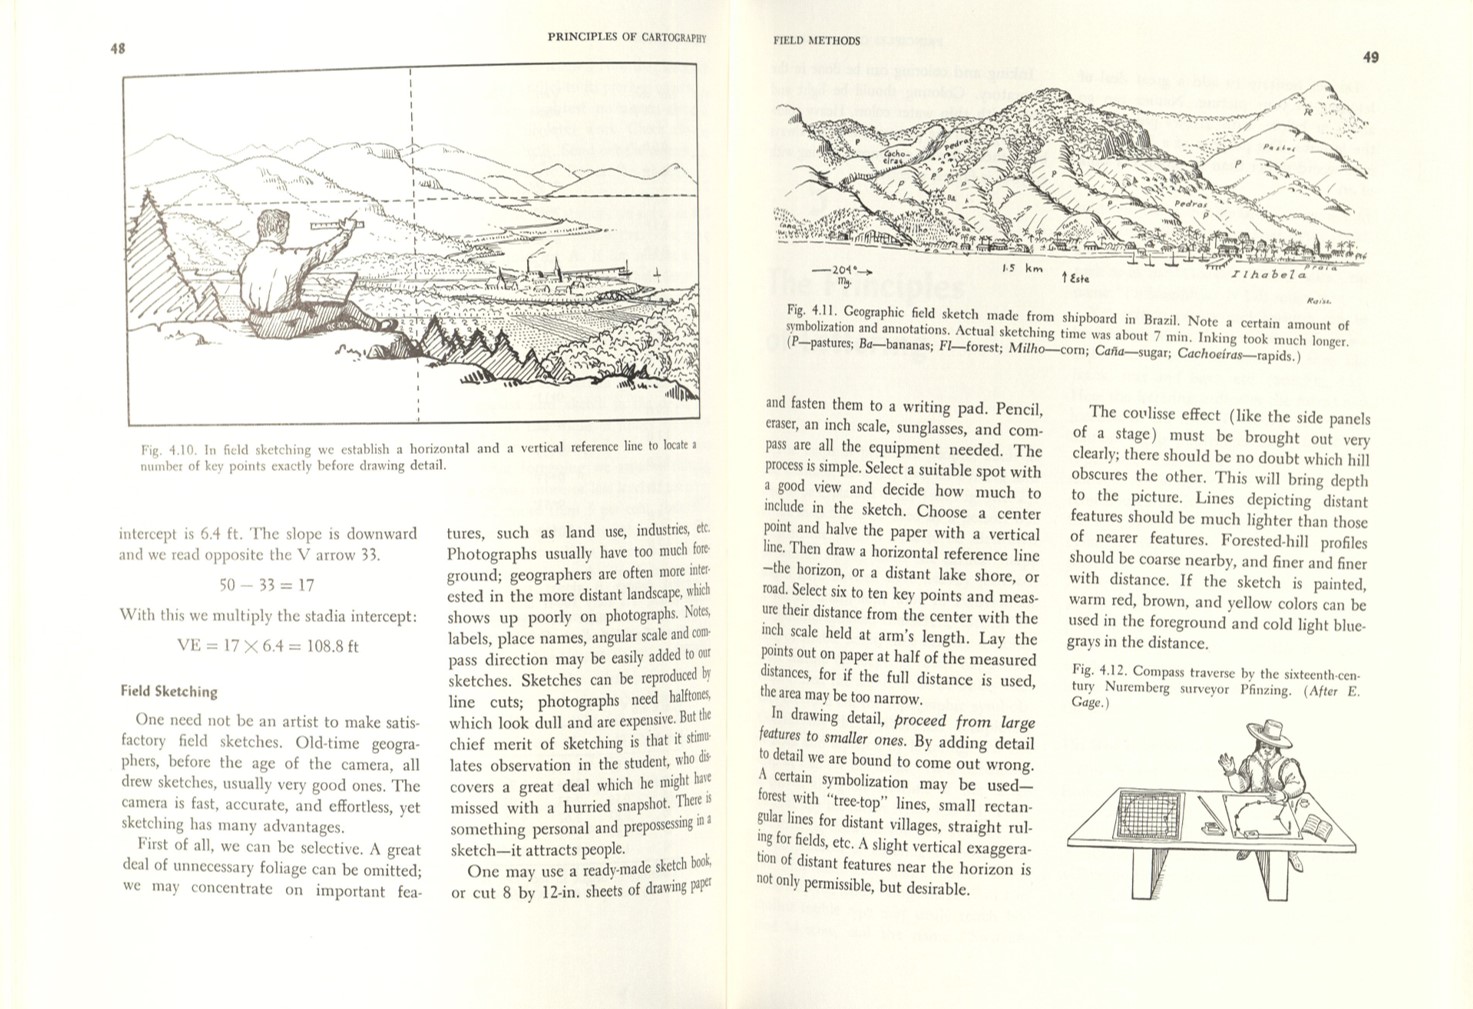 Erwin Raisz, “Field Methods” pages in Principles of Cartography, 1962